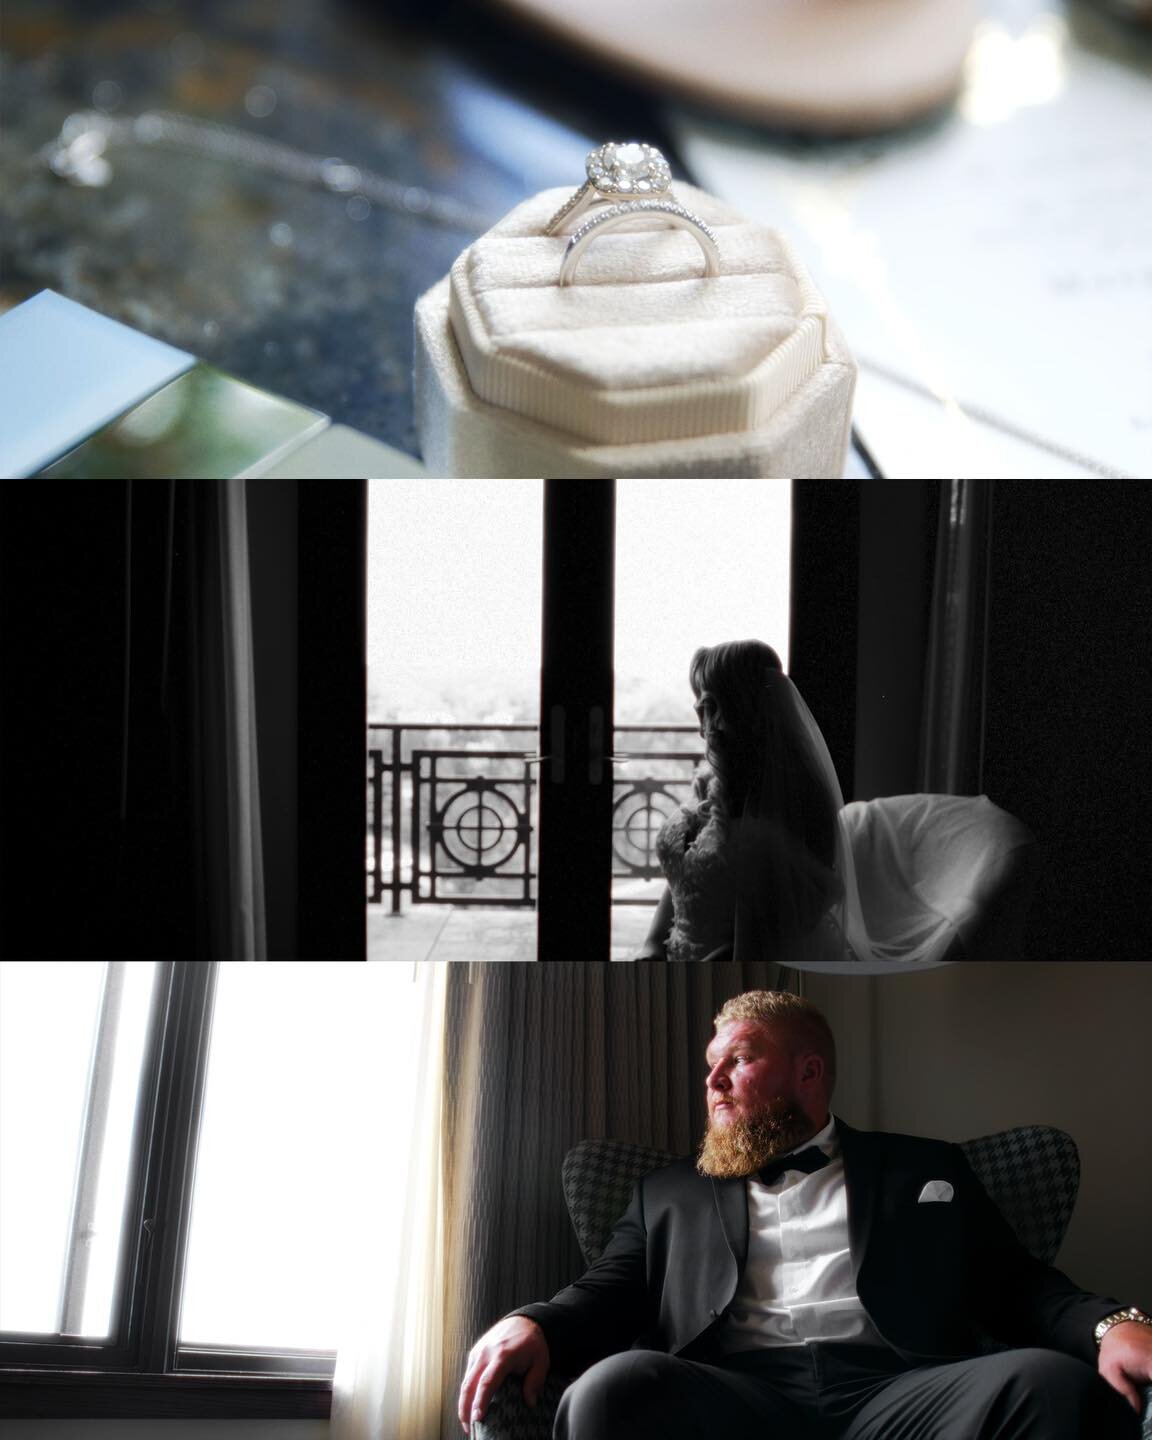 Some more of our favorite stills from M+T&rsquo;s wedding trailer. We&rsquo;re so excited to share more of their beautiful wedding day! 

#video #cinematic  #video #cinematic #cinematicvideo #CinematicMoments #wedding #weddingfilms #wedding #film #we